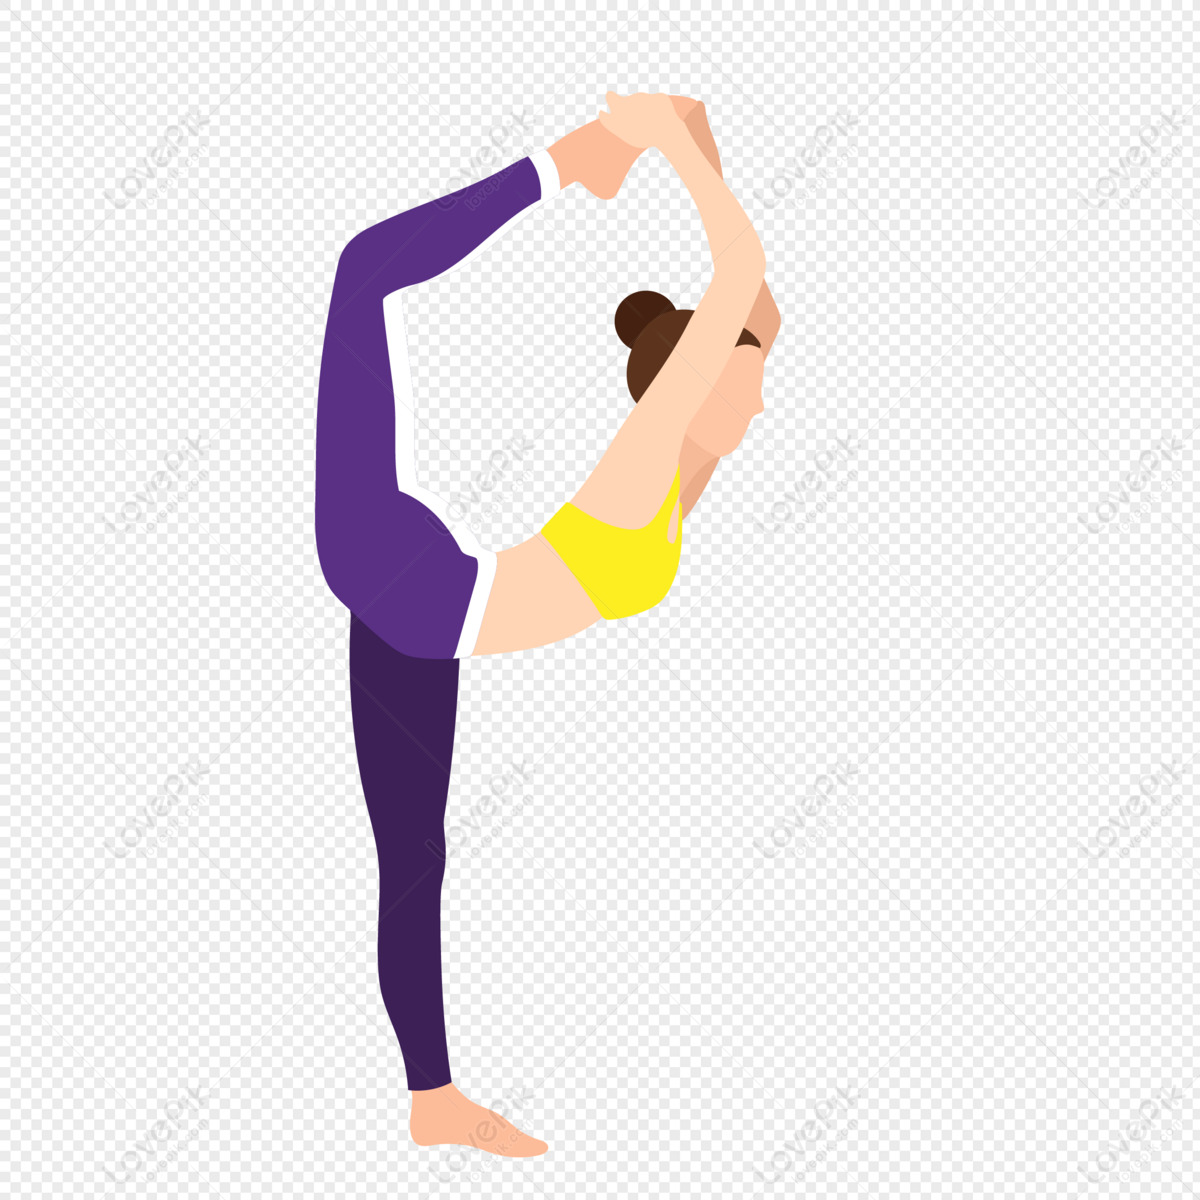 Woman Practicing Yoga. Girl Meditate Outdoor In Park In Lotus Position On Transparent  Background With Green Leaves. Padmasana Pose For Relaxing And Meditation.  Cartoon Flat Vector Illustration, Icon Royalty Free SVG, Cliparts,